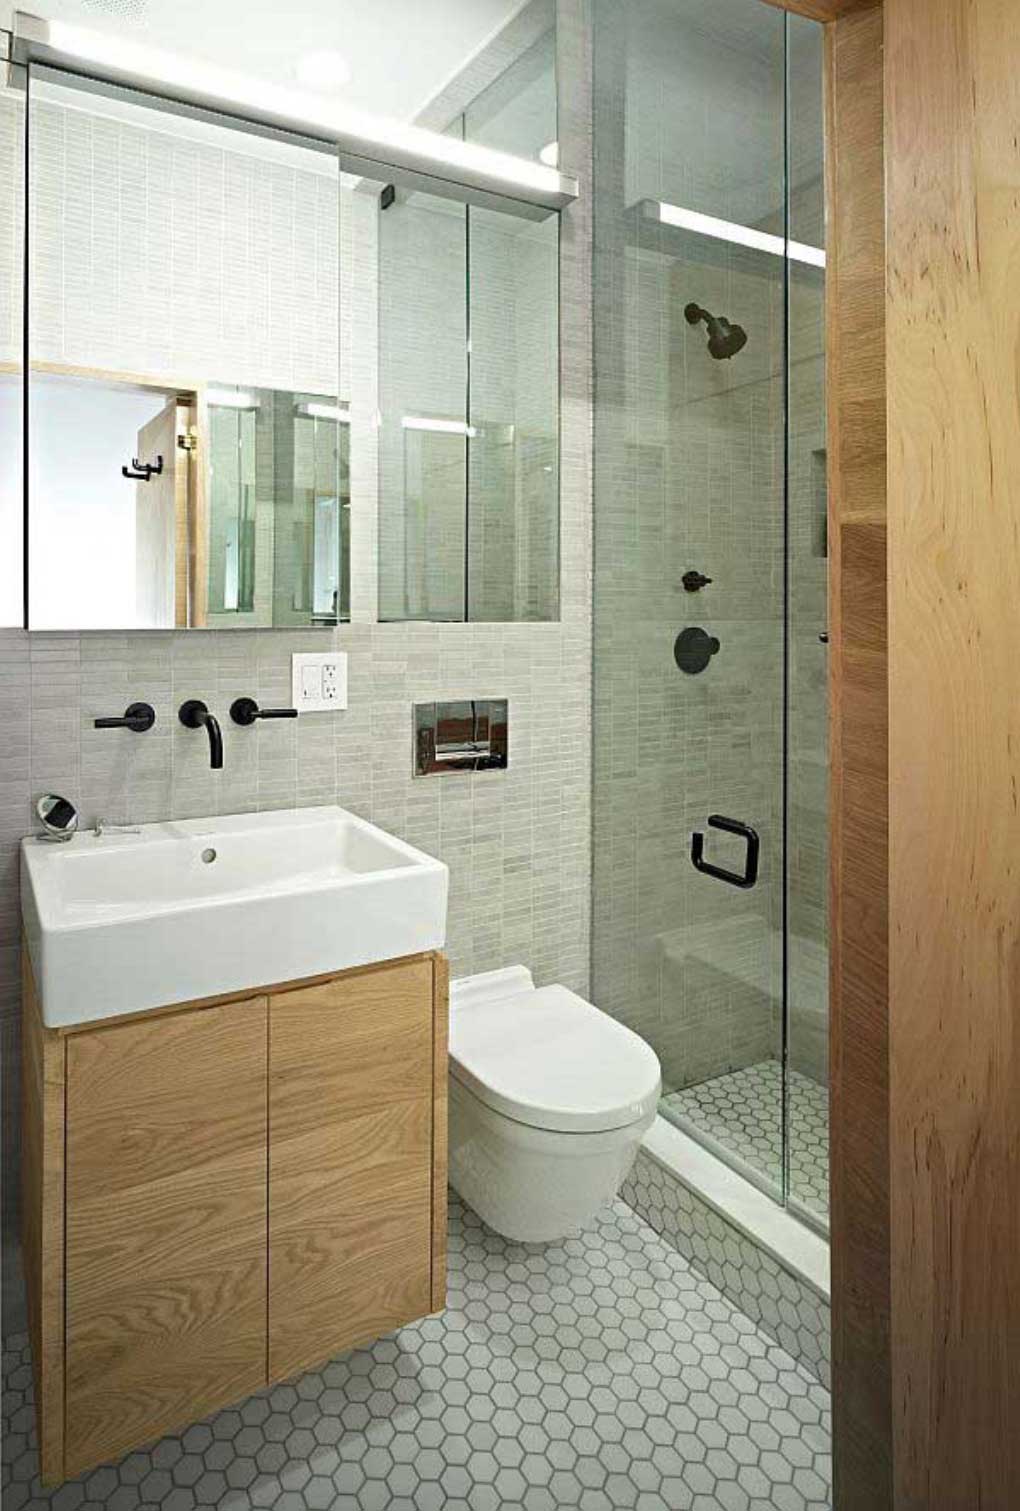 Bathroom Decorating Small Luxurious Bathroom Decorating Ideas For Small Space With Modern Glass Shower Enclosure Designs And Rustic Wooden Elements Bathroom Ideas Also Elegant White Sink Basin Design Bathroom The Most Comfortable Bathroom Decorating Ideas